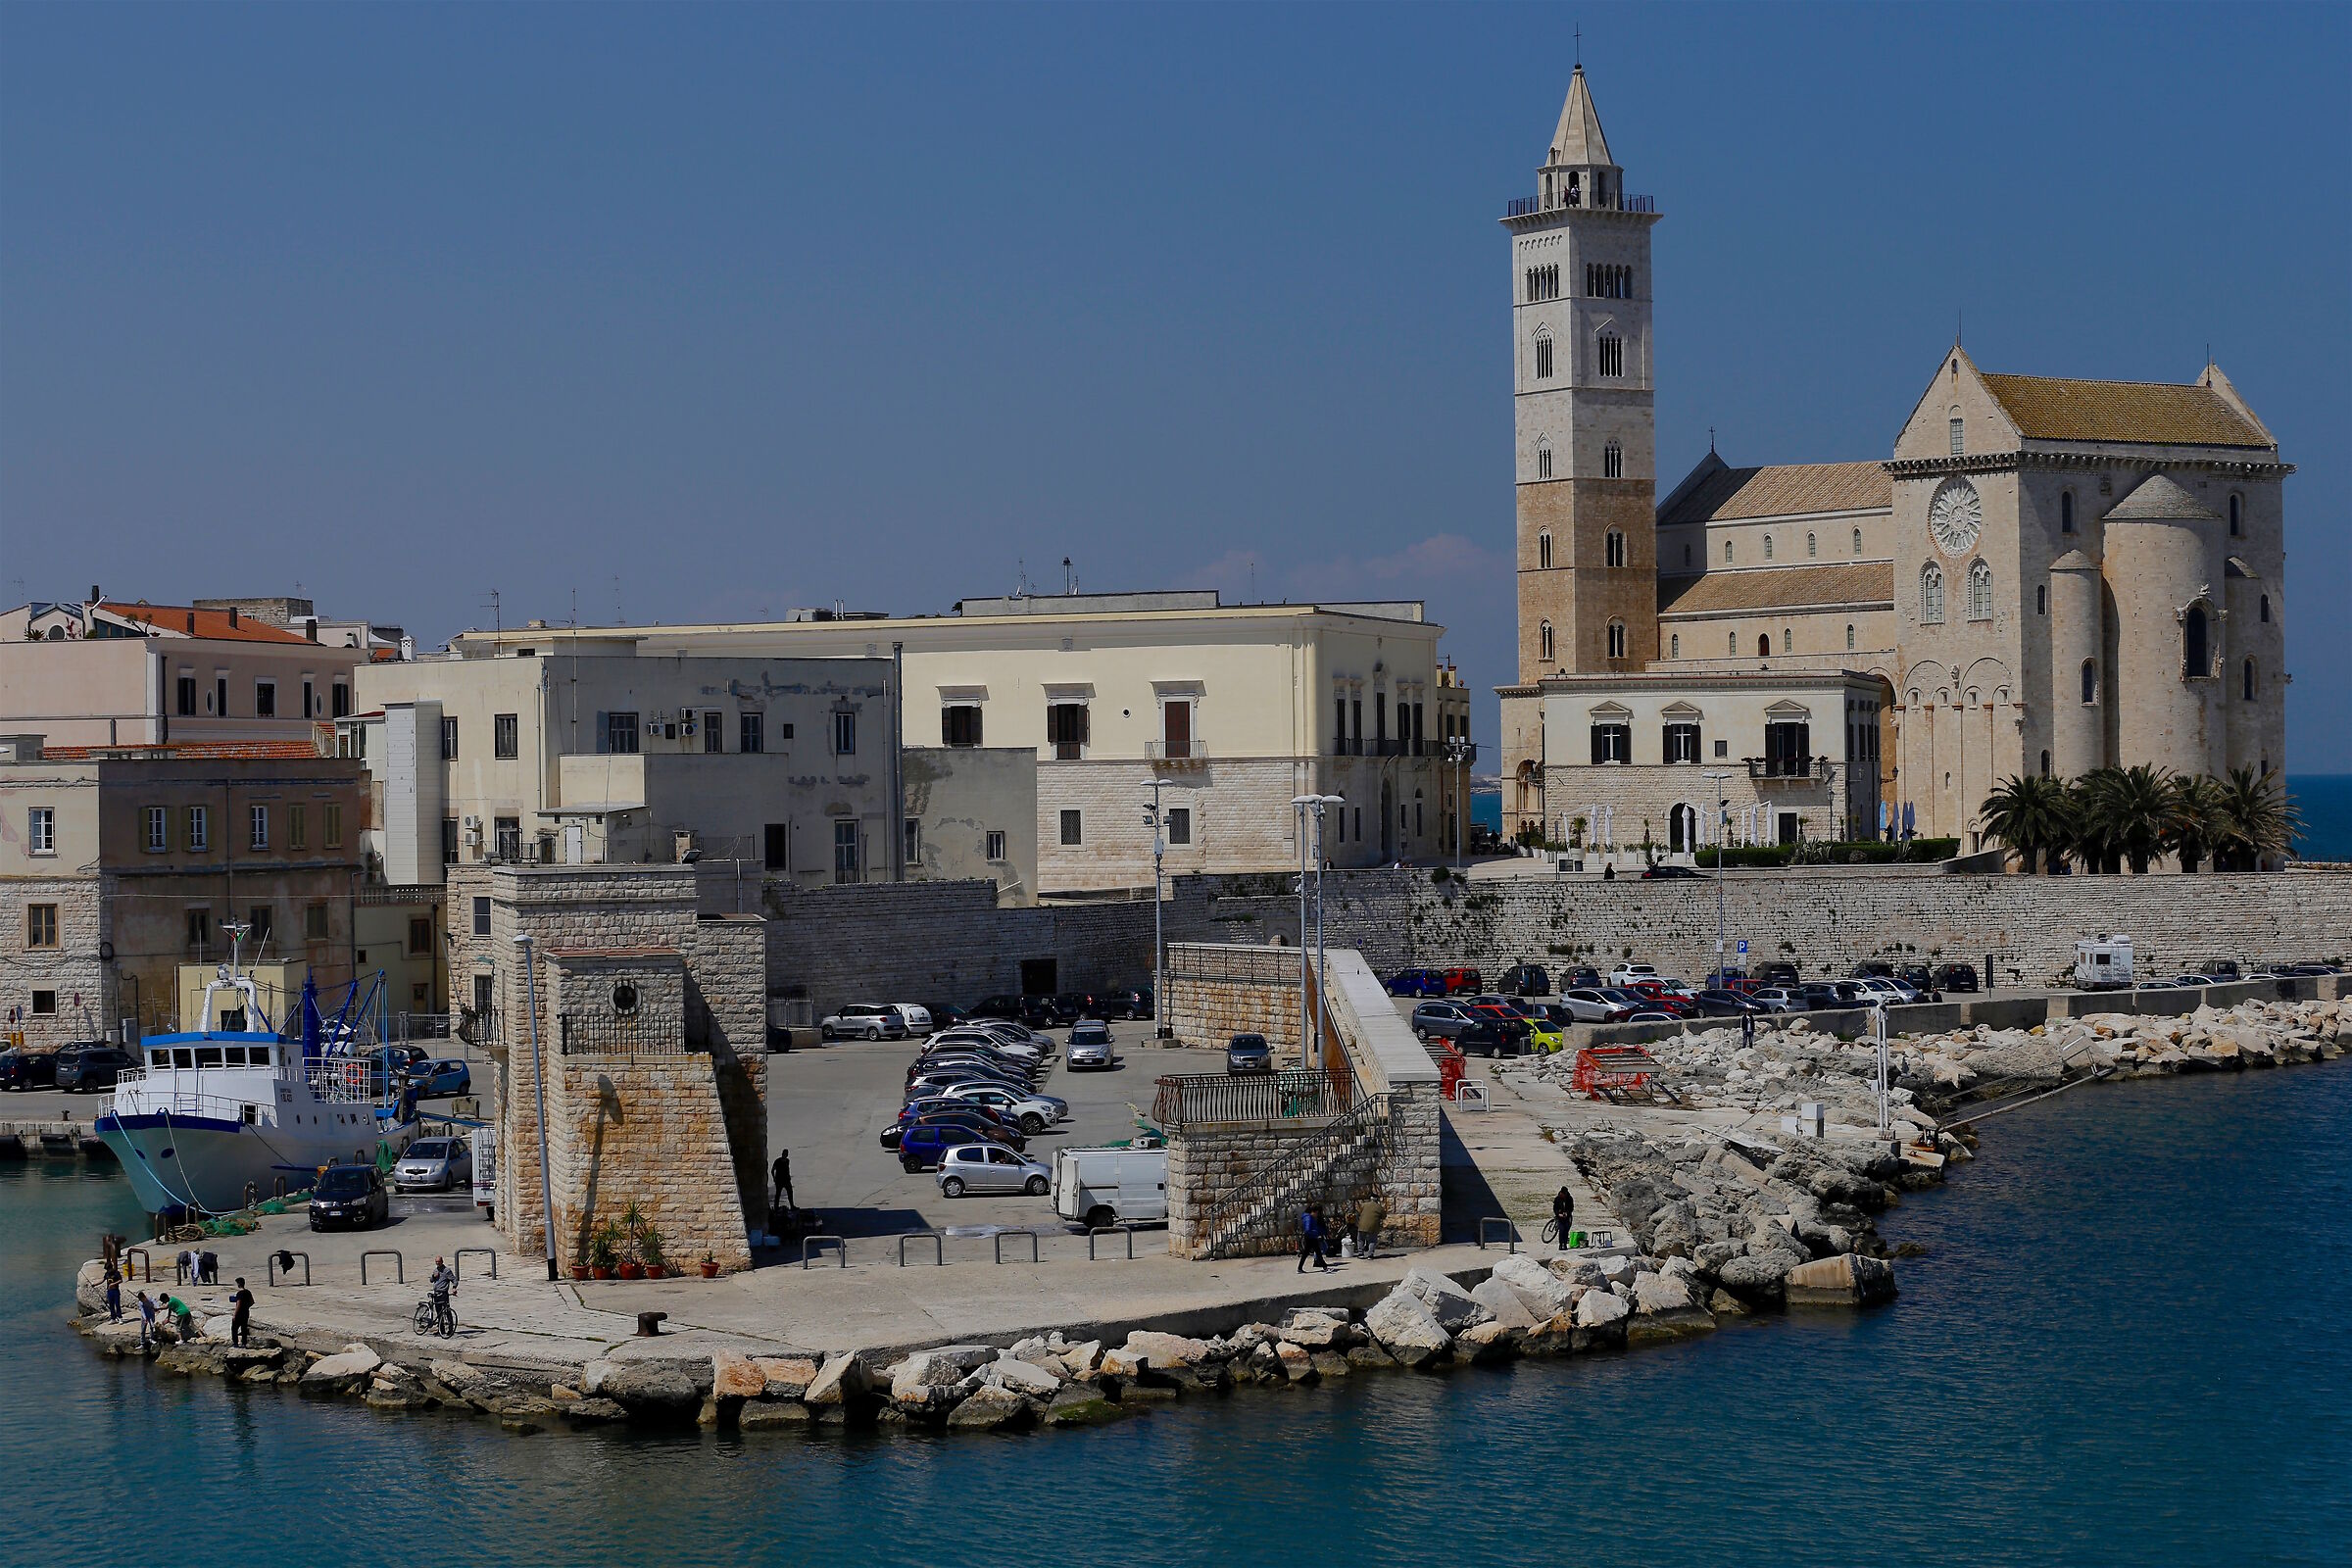 The Cathedral of Trani...